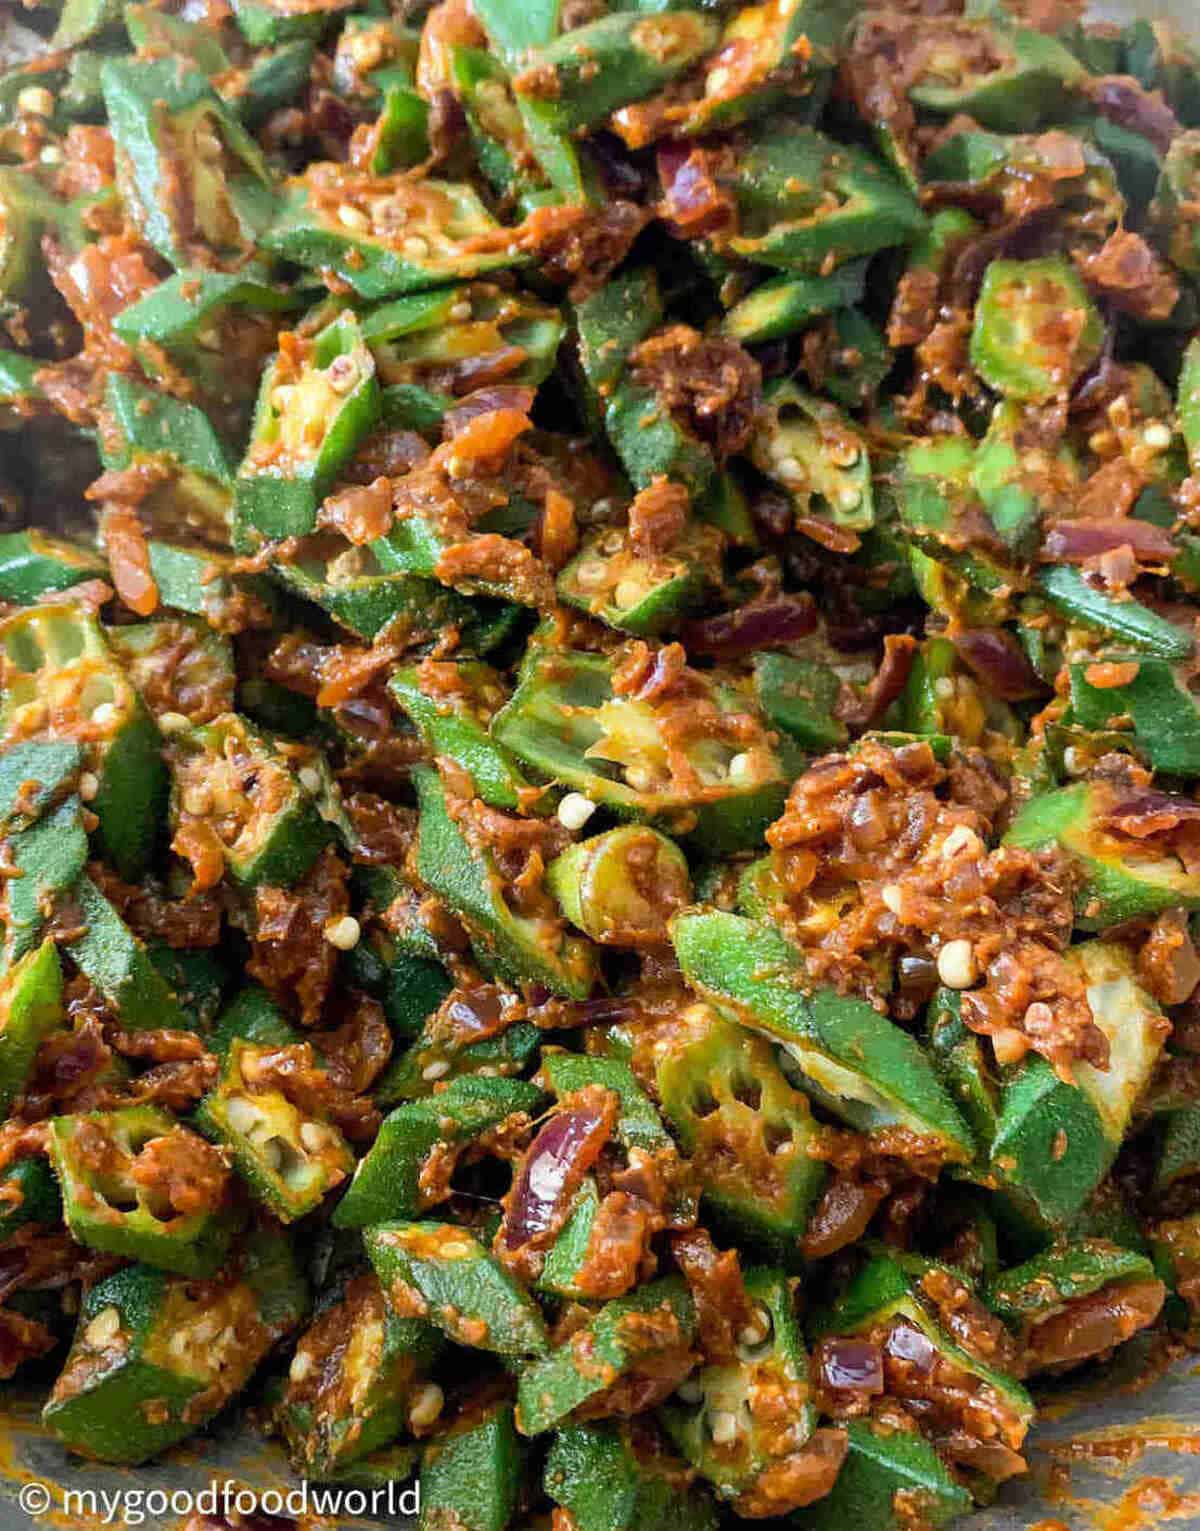 Close up shot of sliced bhindi pieces frying in masala paste that is thickly coating the bhindi.